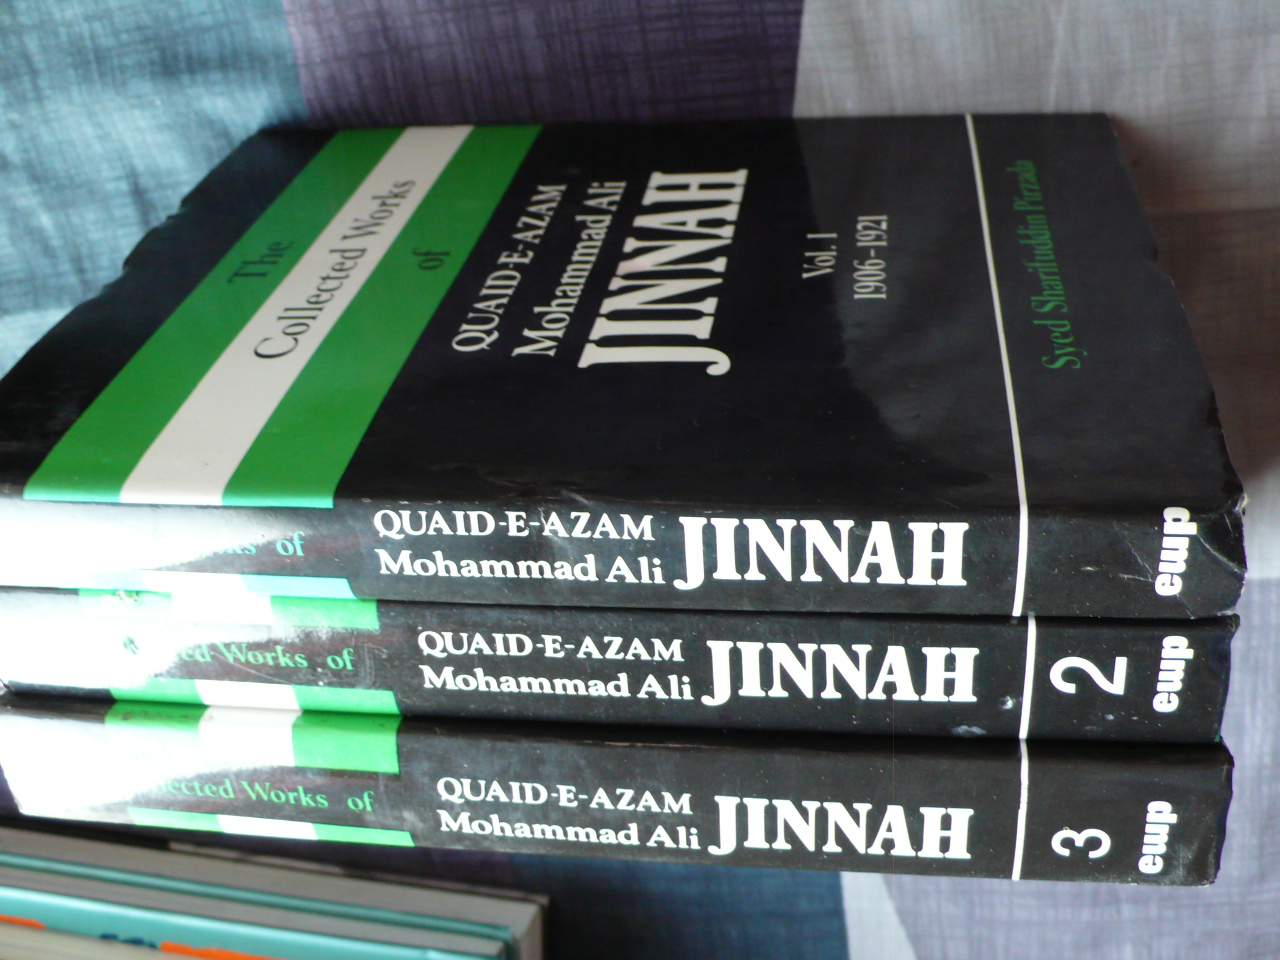 the collected works of quaid-i-azam mohammad ali jinnah (3 vol.)